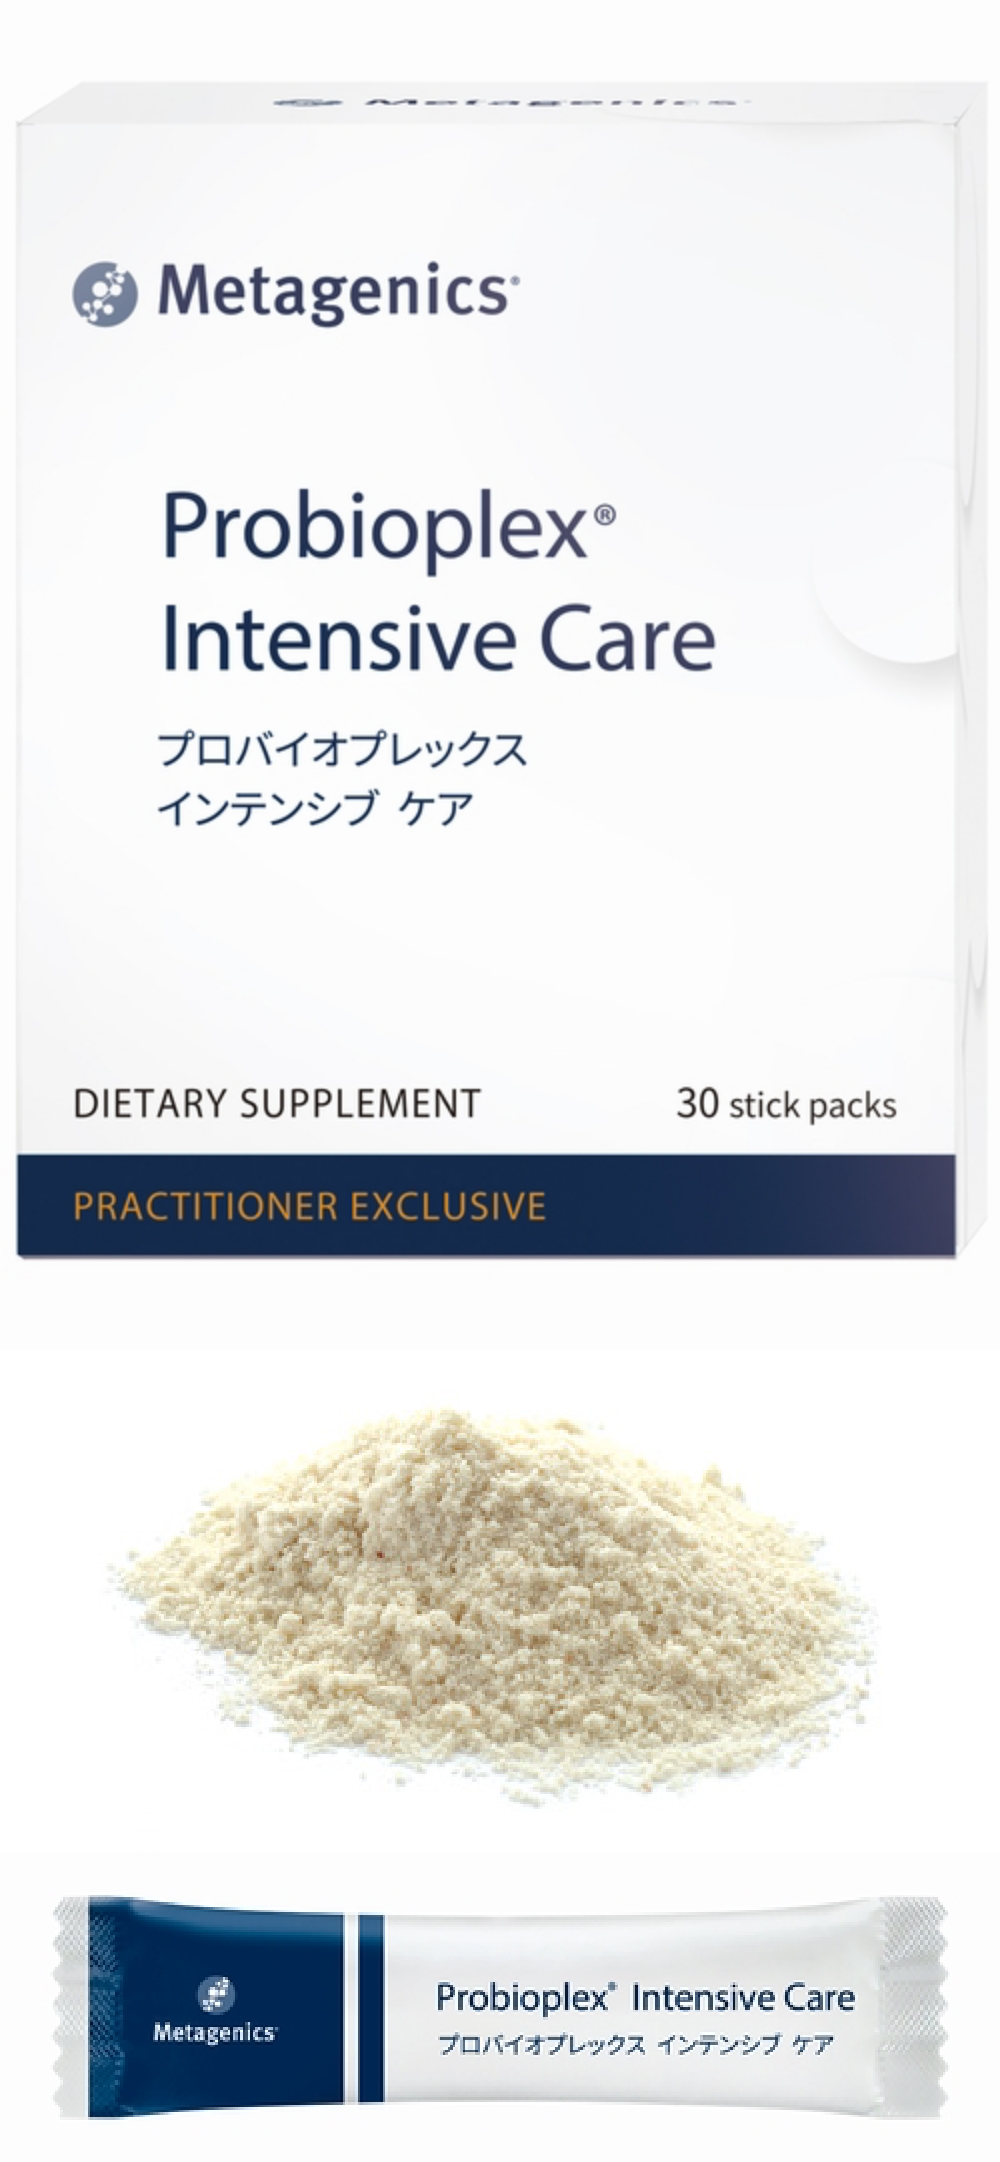 <small>Probioplex® Intensive Care</small><br>プロバイオプレックス <br class="pc-only">インテンシブ ケアのイメージ画像